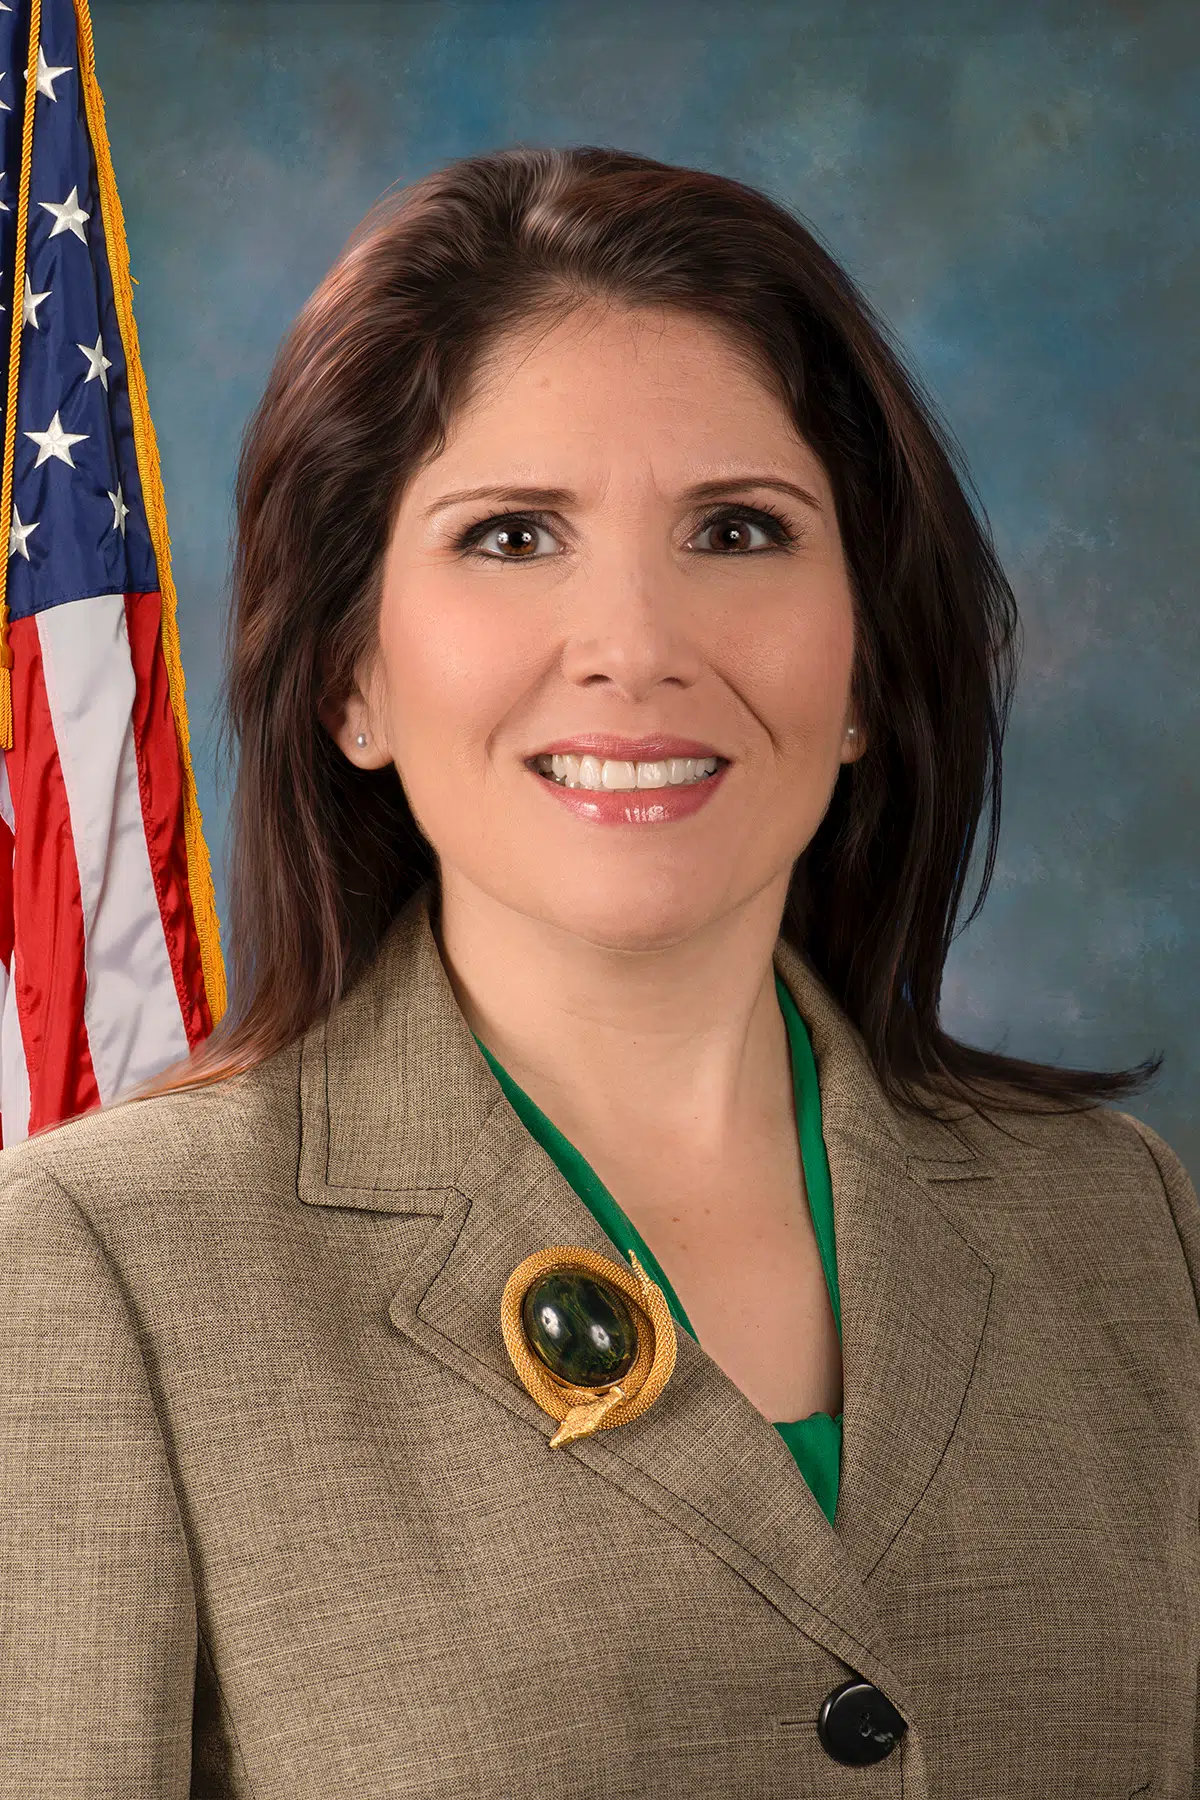 Illinois Lieutenant Governor Evelyn Sanguinetti to join Busboom and Wolfe Wednesday